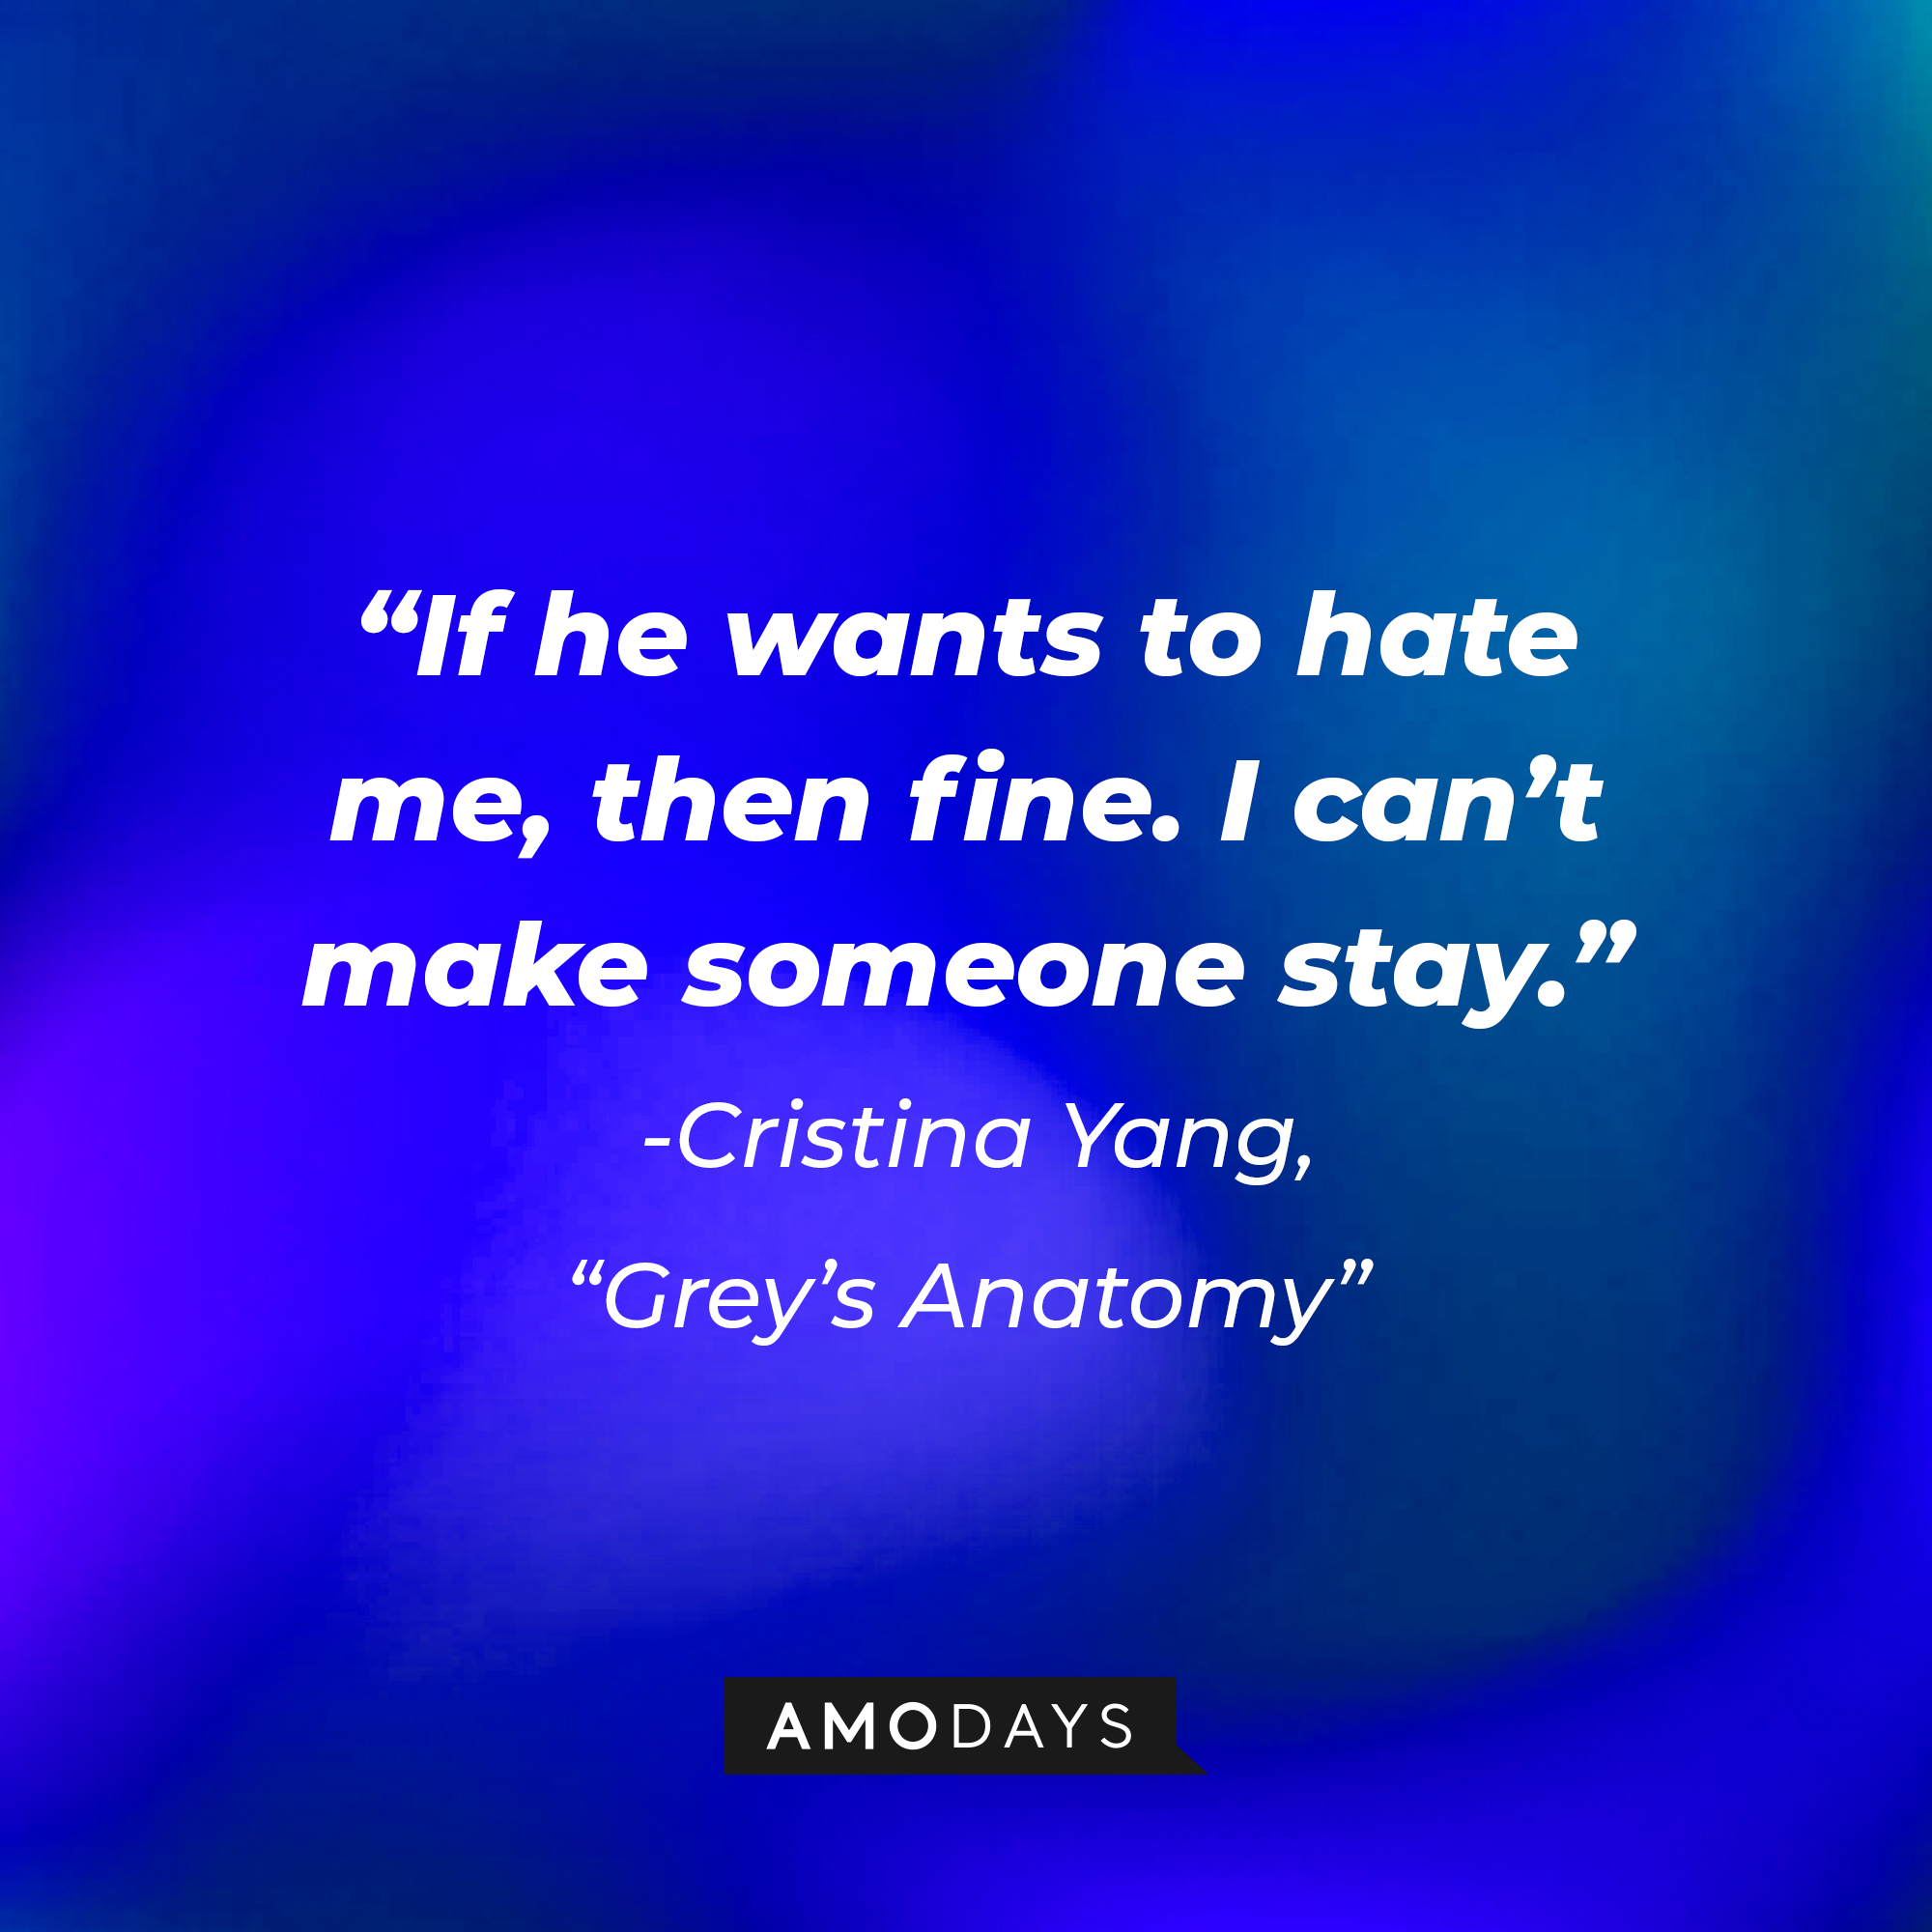 Cristina Yang's quote on "Grey's Anatomy:" “If he wants to hate me, then fine. I can’t make someone stay.” | Source: AmoDays